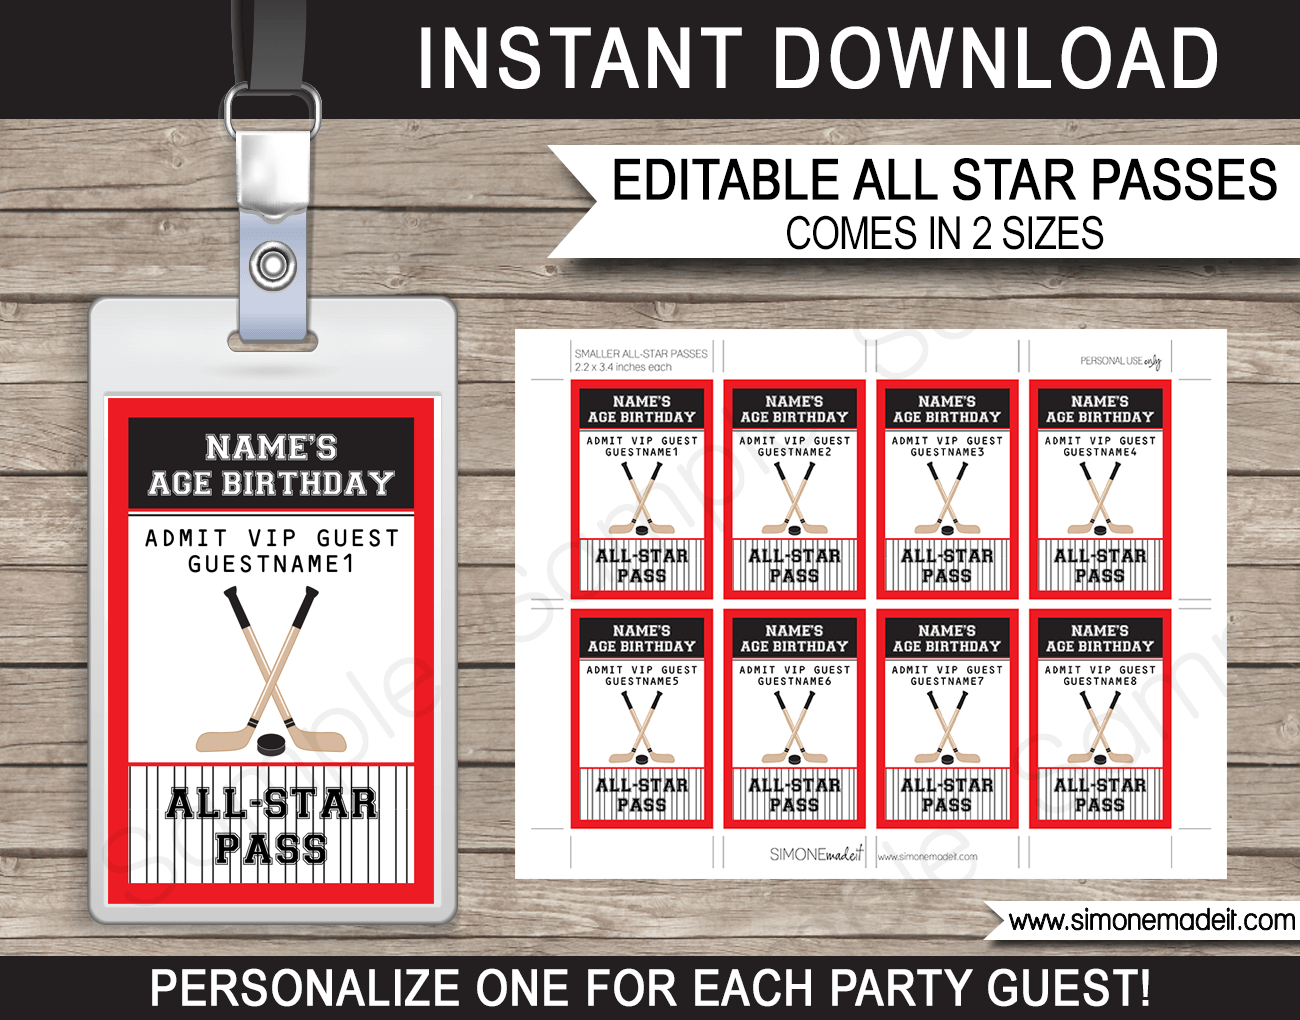 Hockey Birthday Party All Star VIP Passes | Printable Inserts | Party Favors | Editable DIY Template | $3.50 INSTANT DOWNLOAD via SIMONEmadeit.com